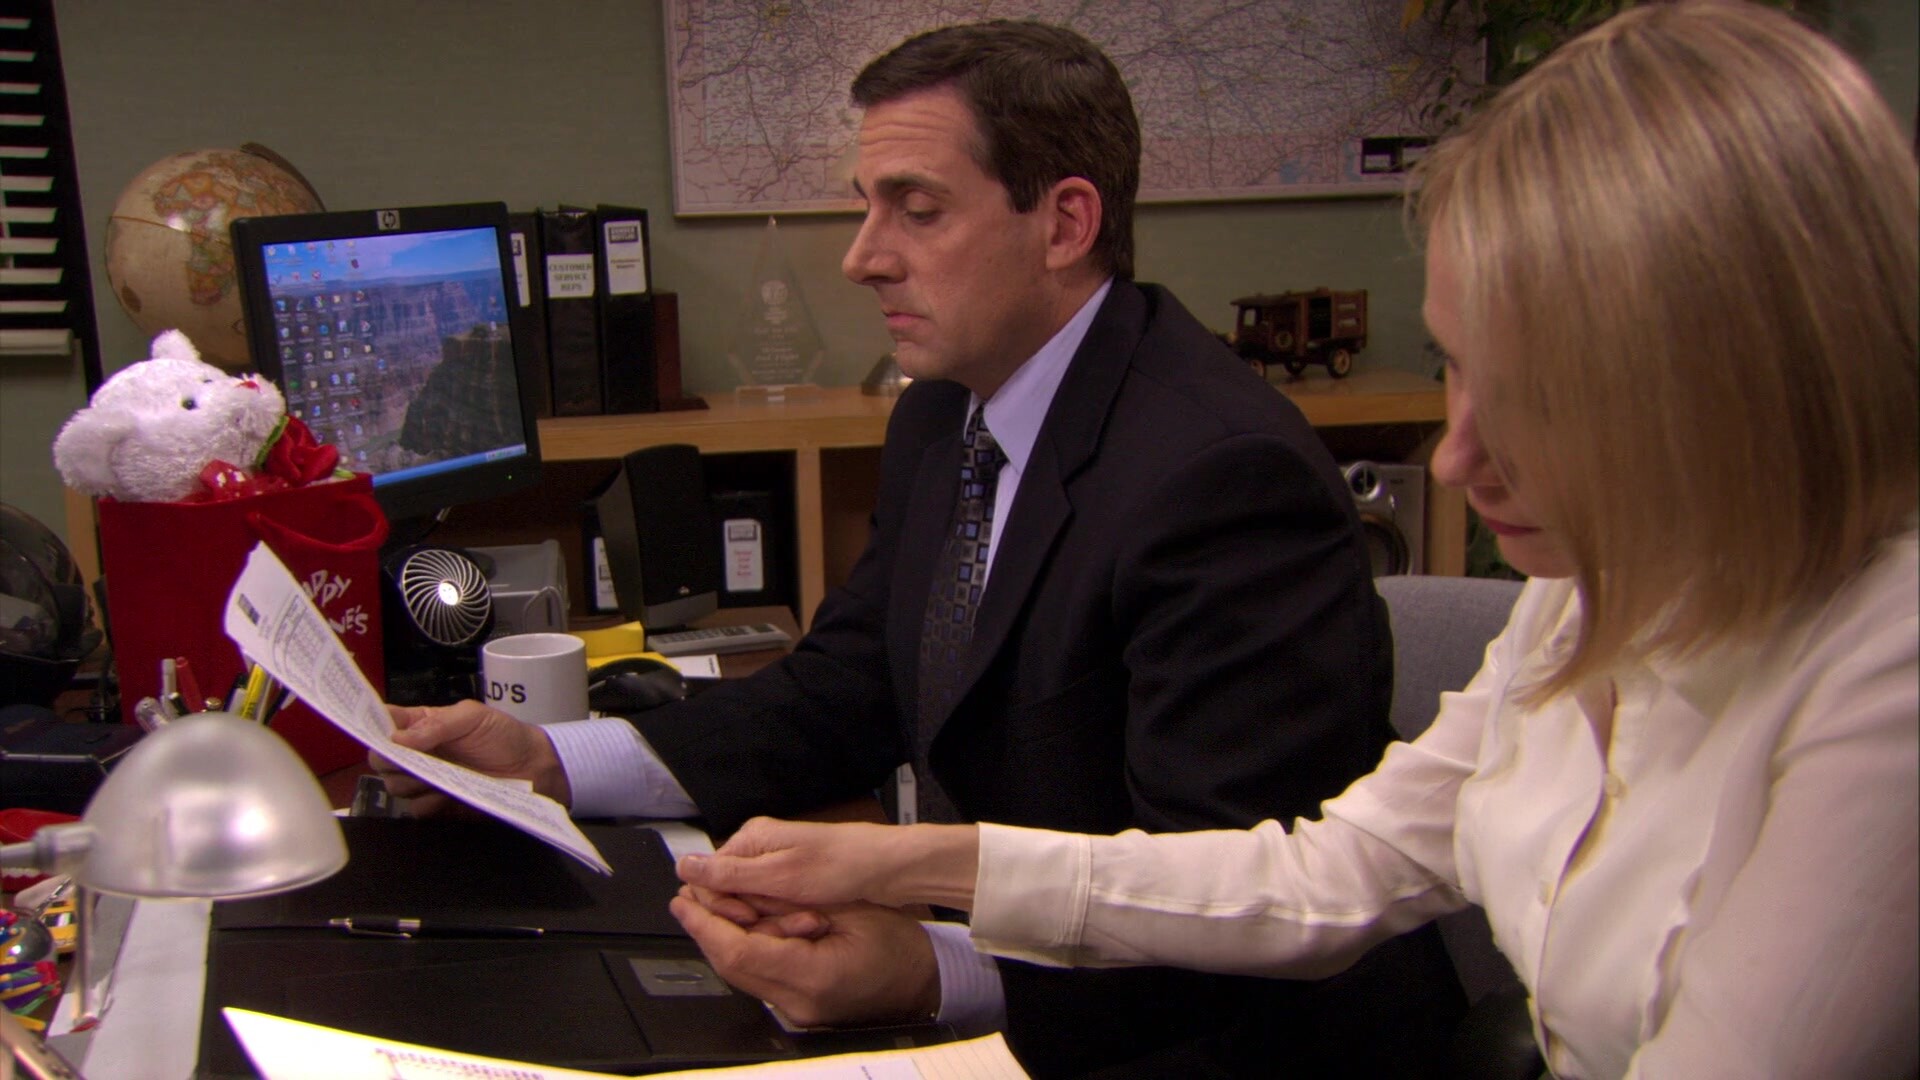 The Office (TV Series): Season 7, Episode 16, Steve Carell as Michael Scott, Amy Ryan as Holly Flax. 1920x1080 Full HD Background.